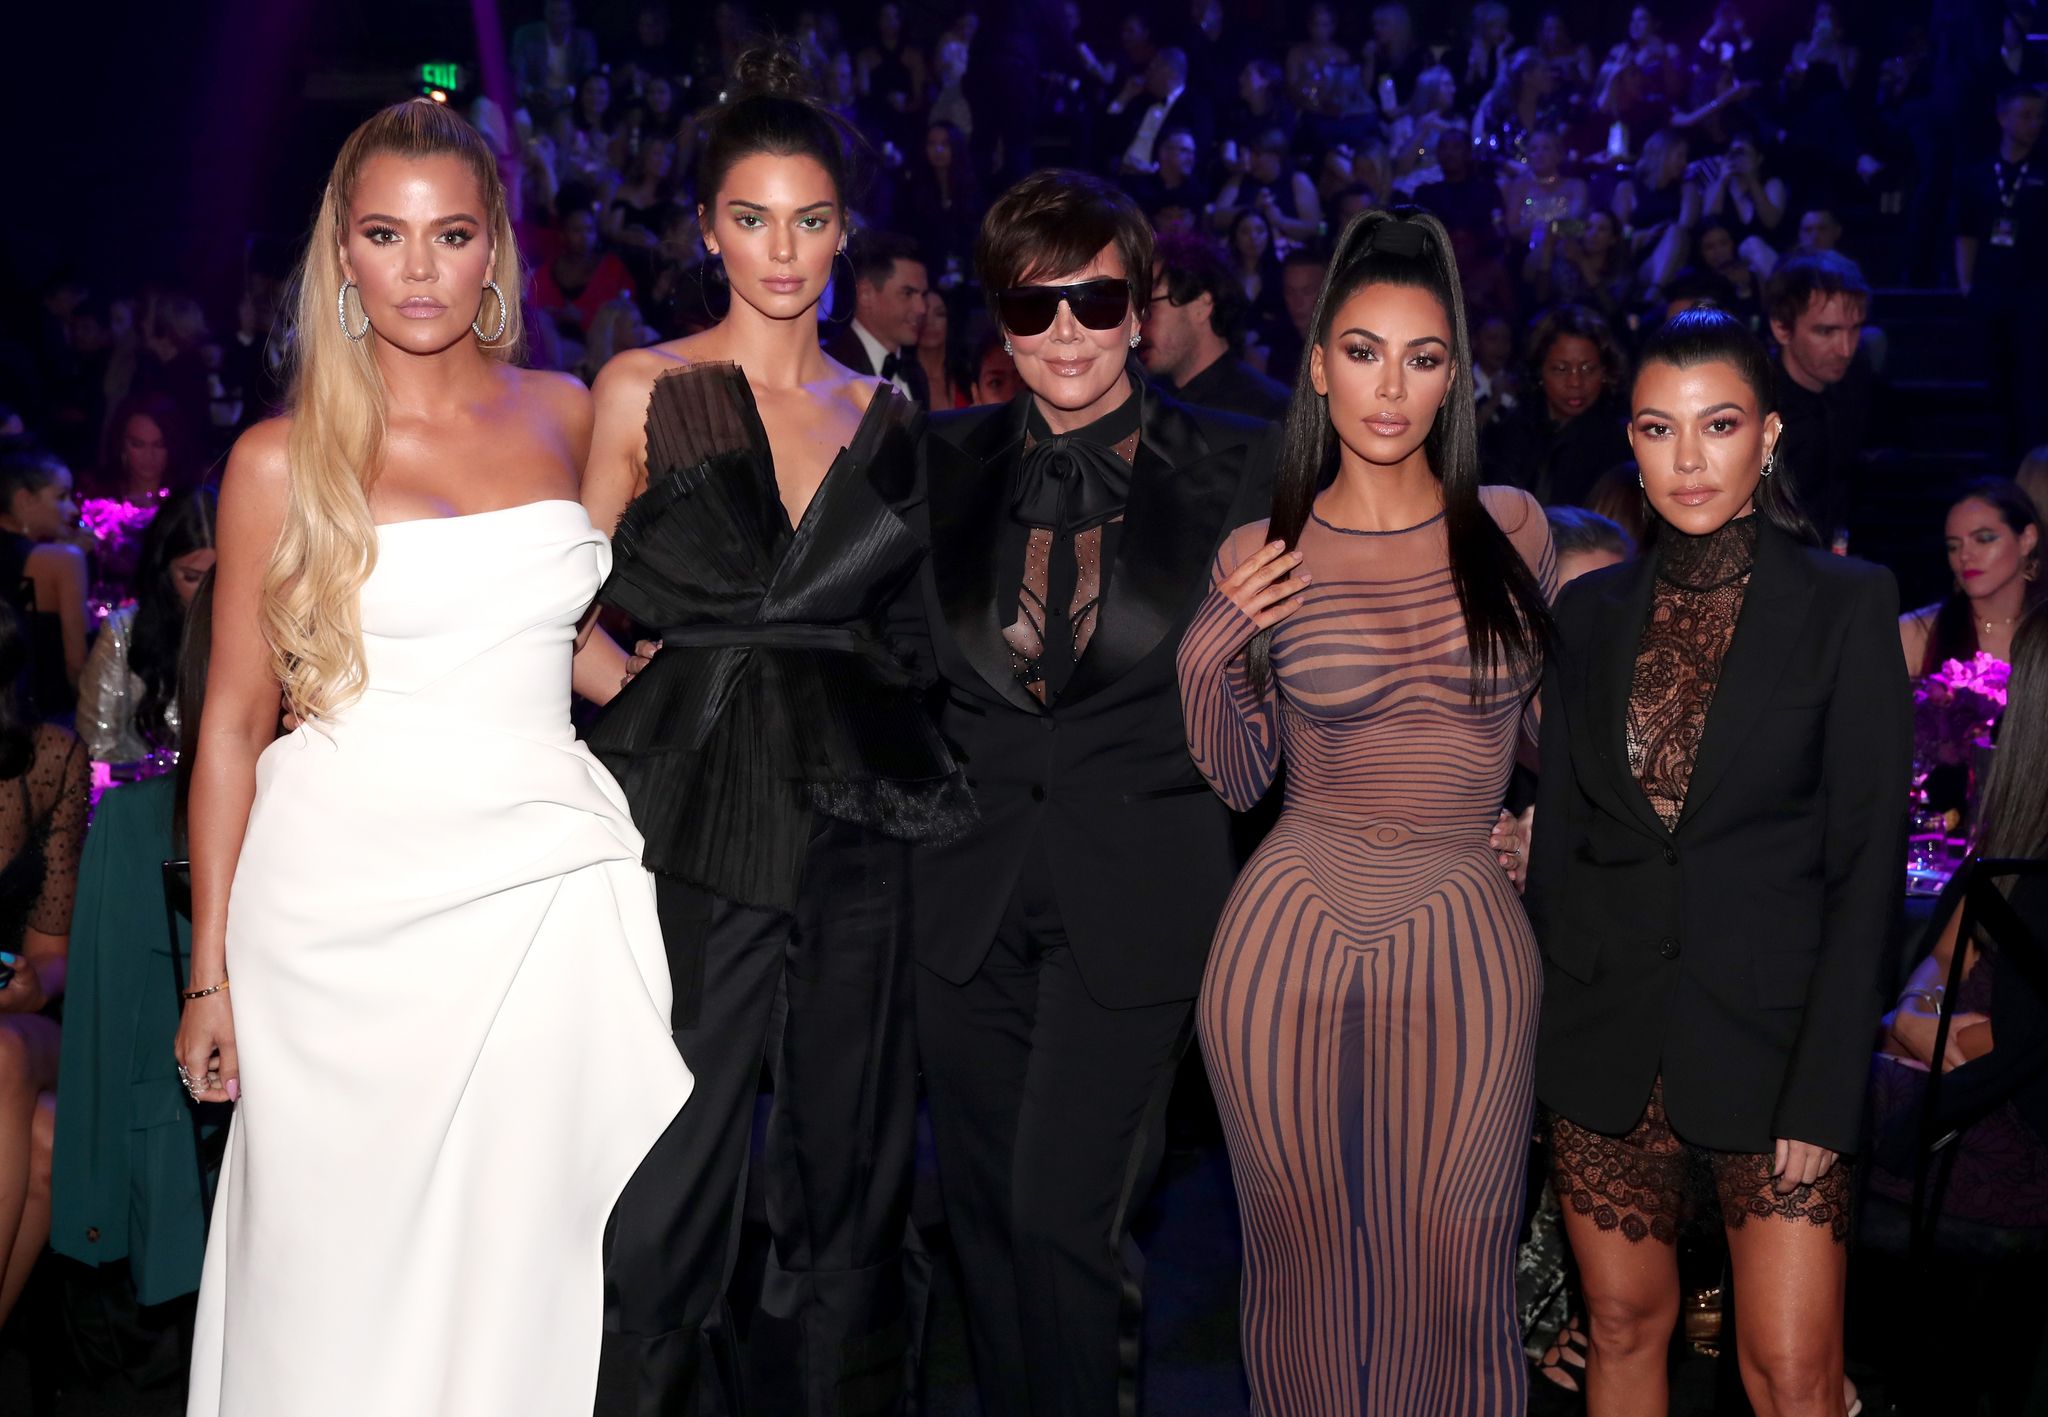 Khloe, Kim & Kourtney Kardashian, and Kris & Kendall Jenner at the 2018 E! People's Choice Awards in November 2018 | Photo: Getty Images